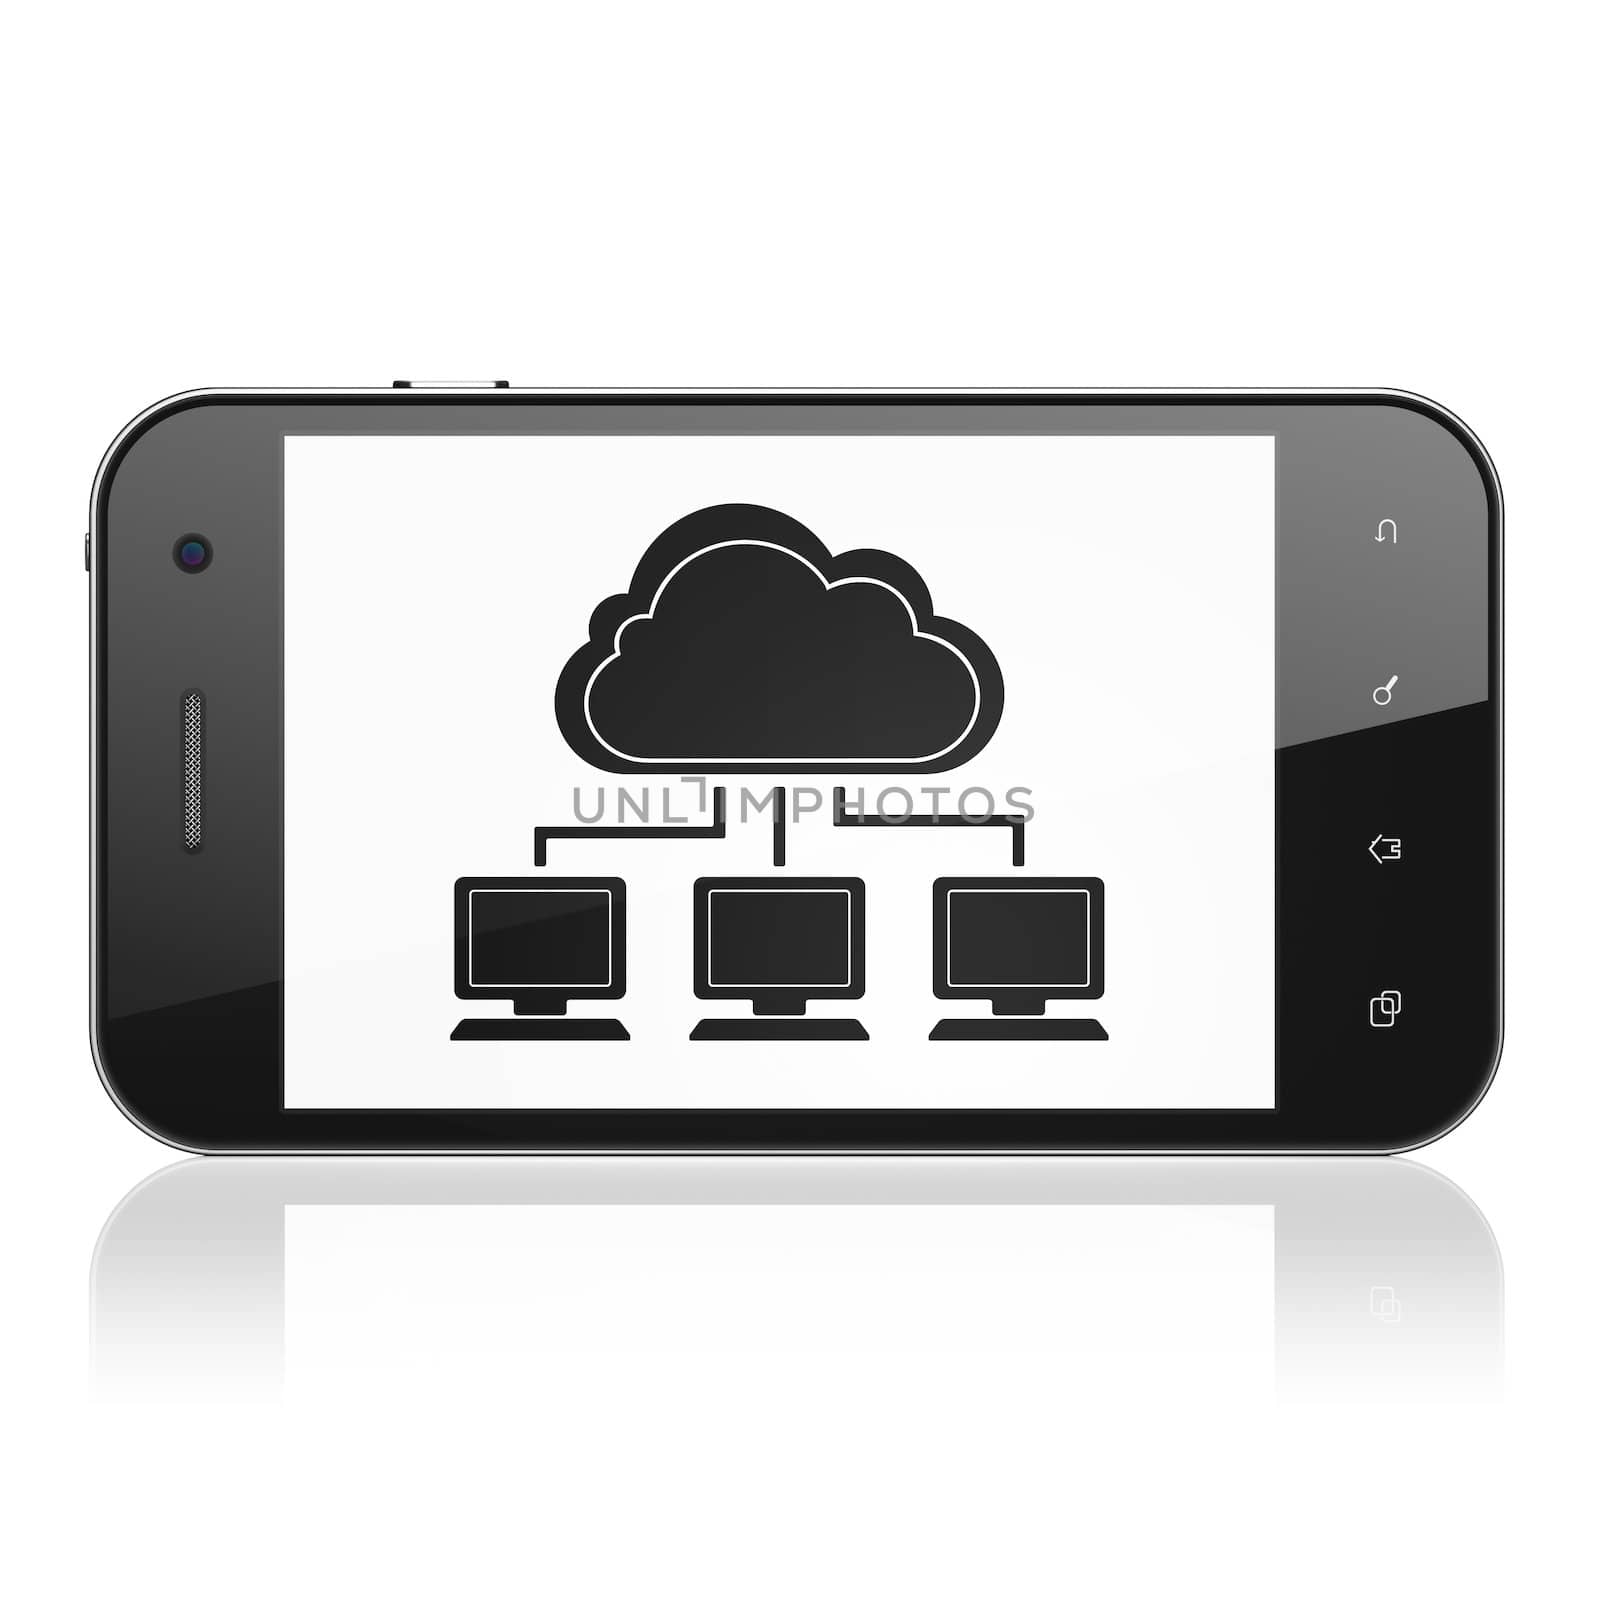 Cloud computing concept: smartphone with Cloud Network icon on display. Mobile smart phone on White background, cell phone 3d render